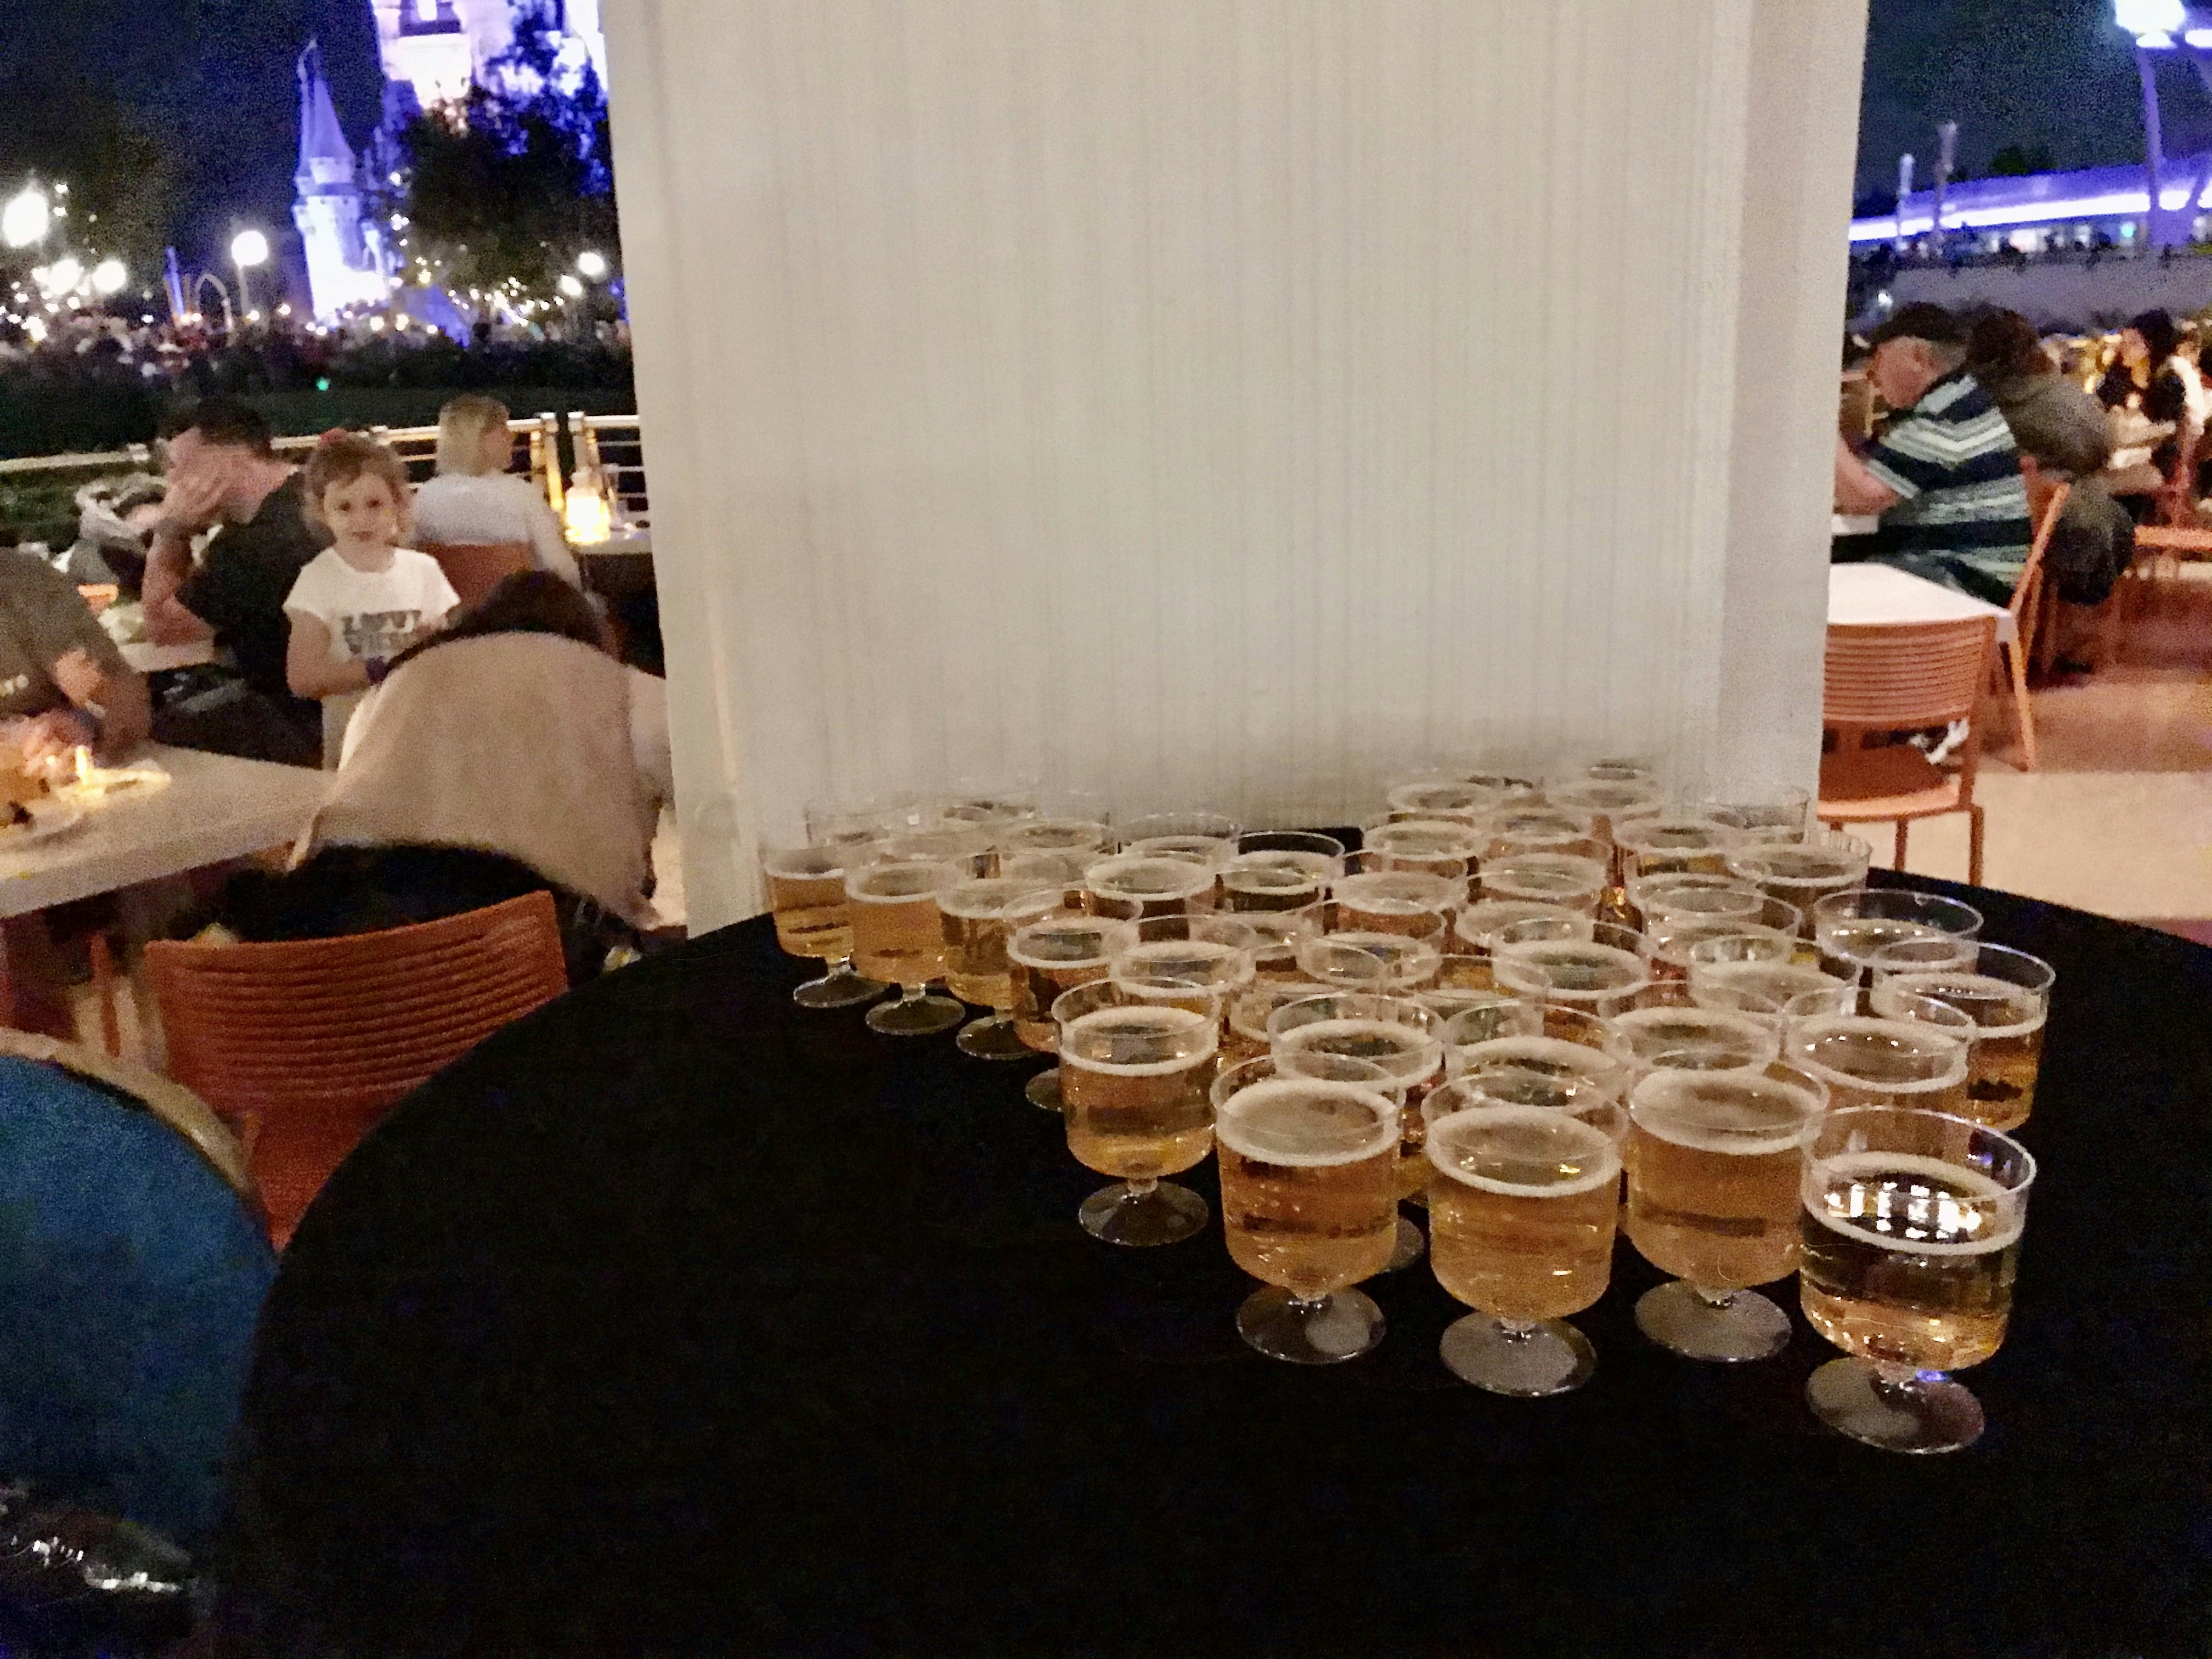 tomorrowland terrace dessert party with alcohol happily ever after magic kingdom feb 2020 211.jpg?auto=compress%2Cformat&ixlib=php 1.2